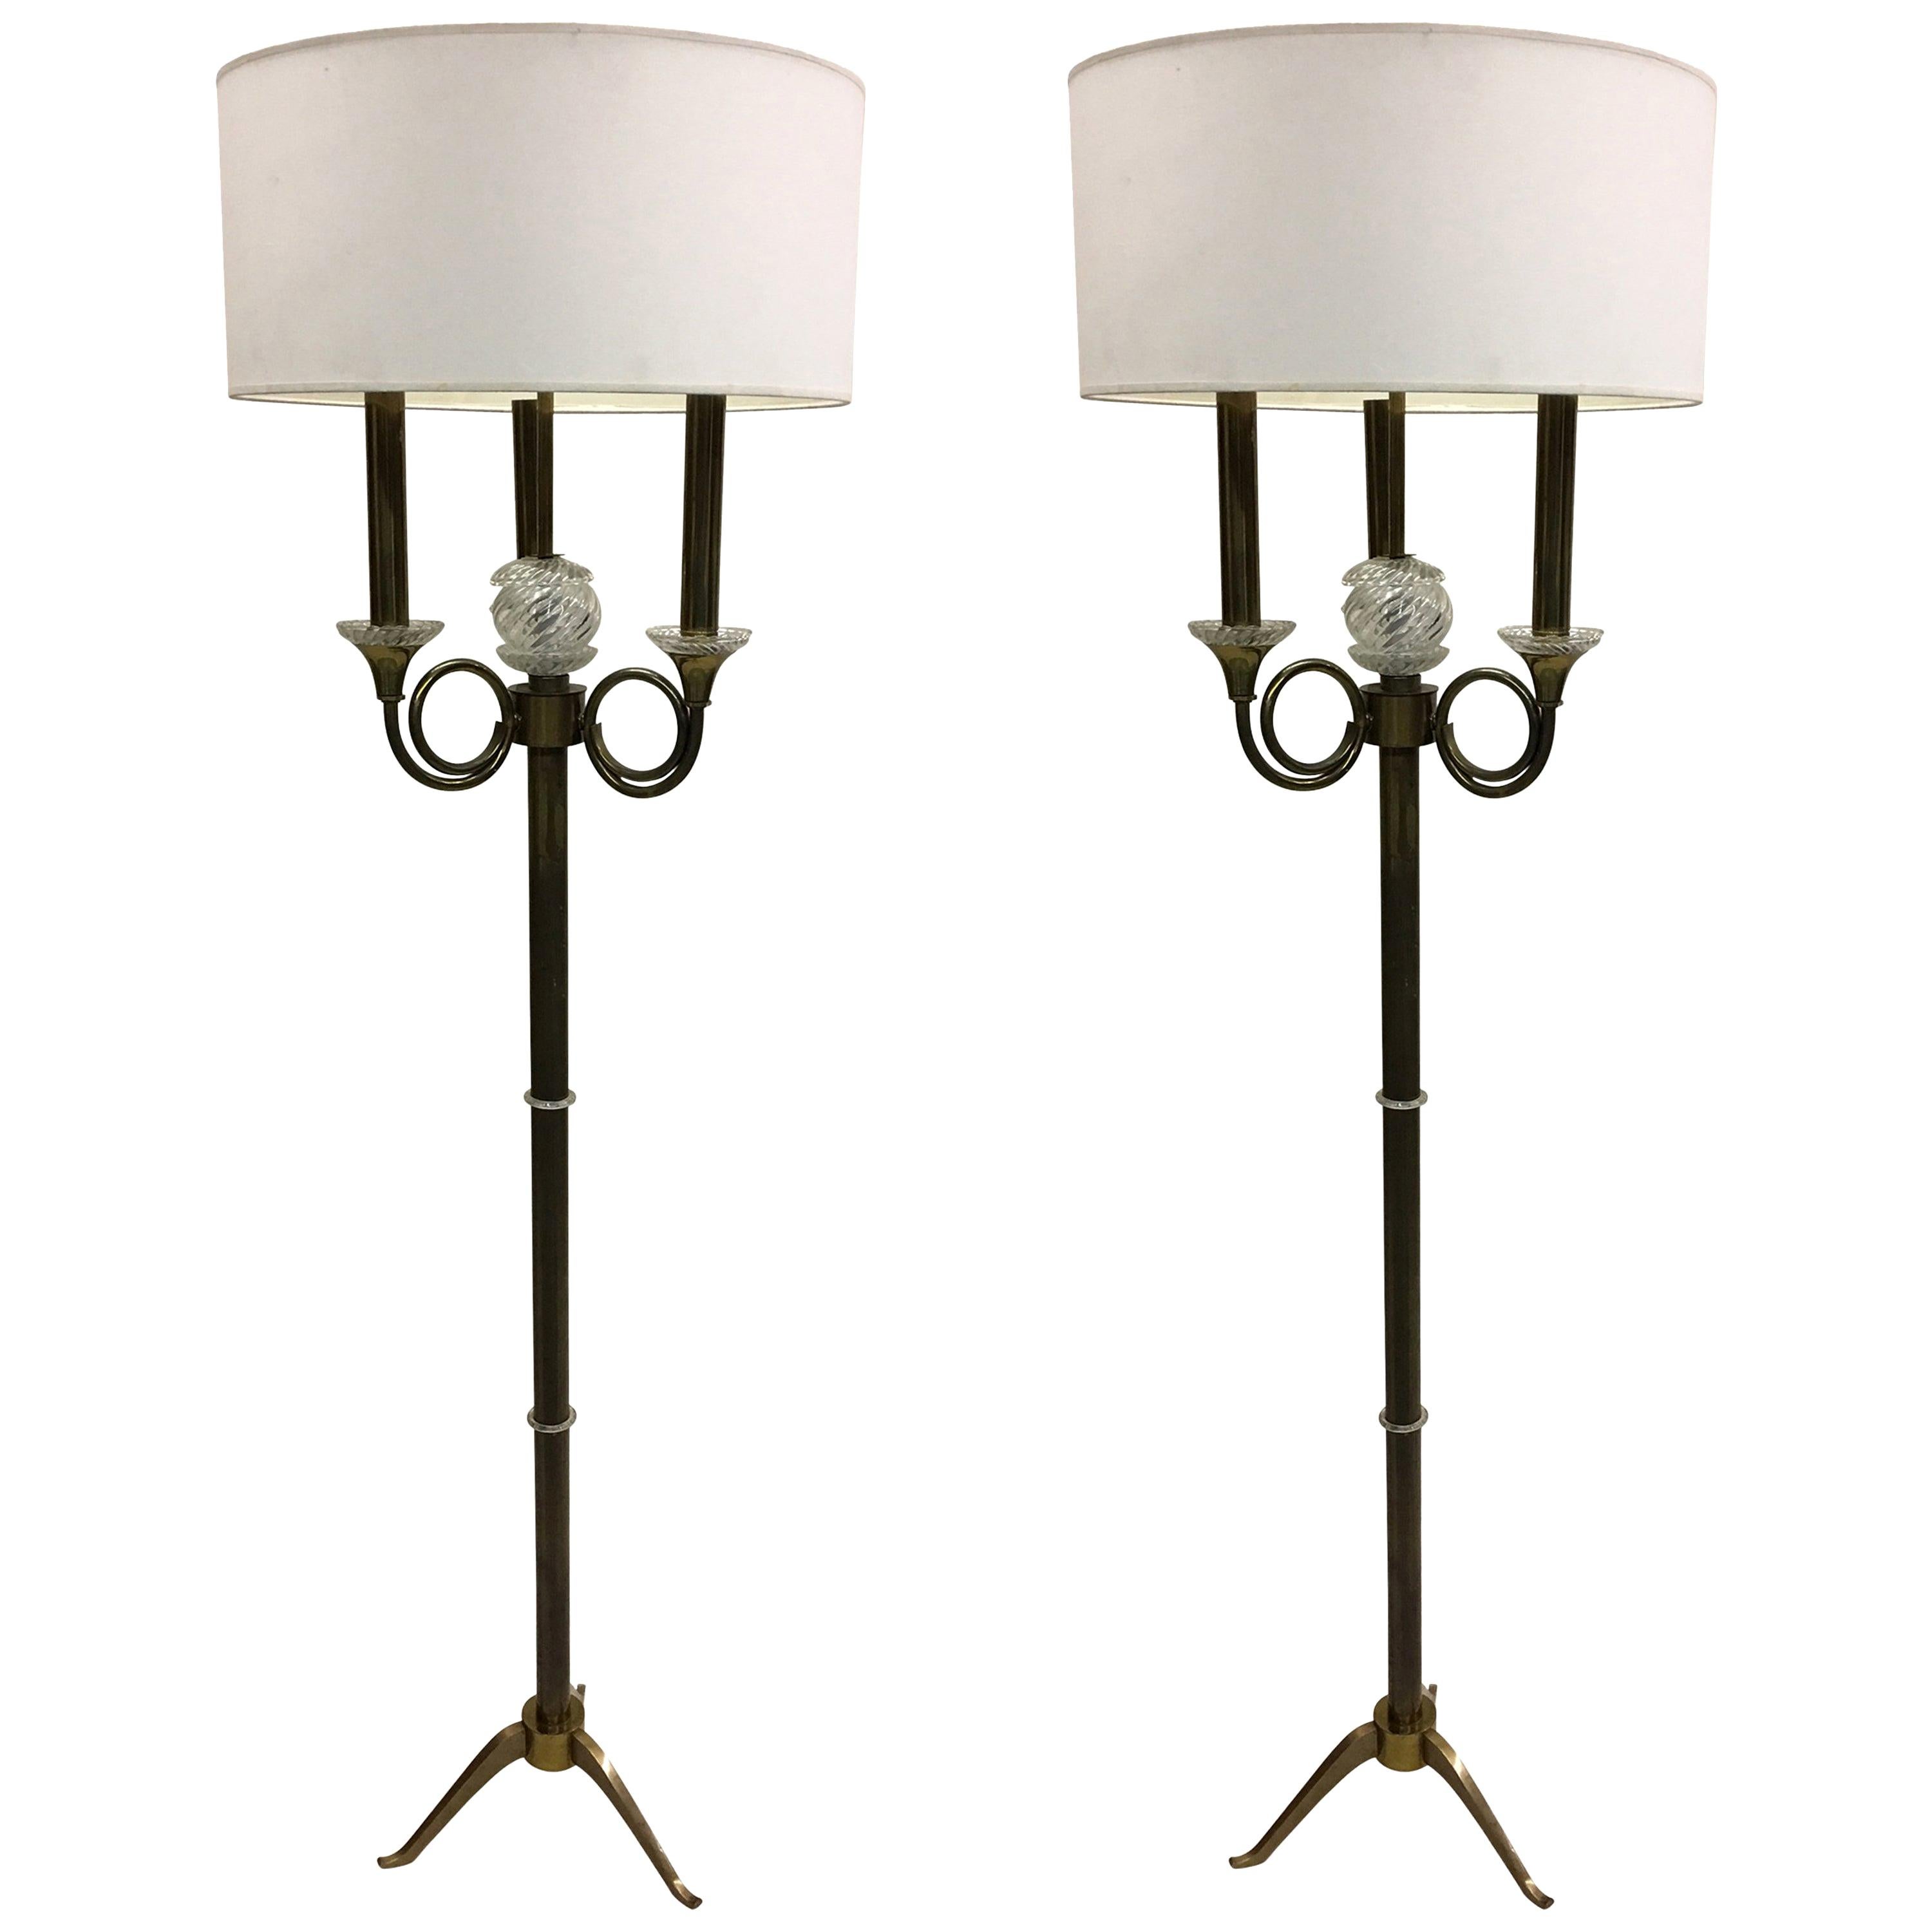 Pair of French Modern Neoclassical Brass and Crystal Floor Lamps, Jules Leleu